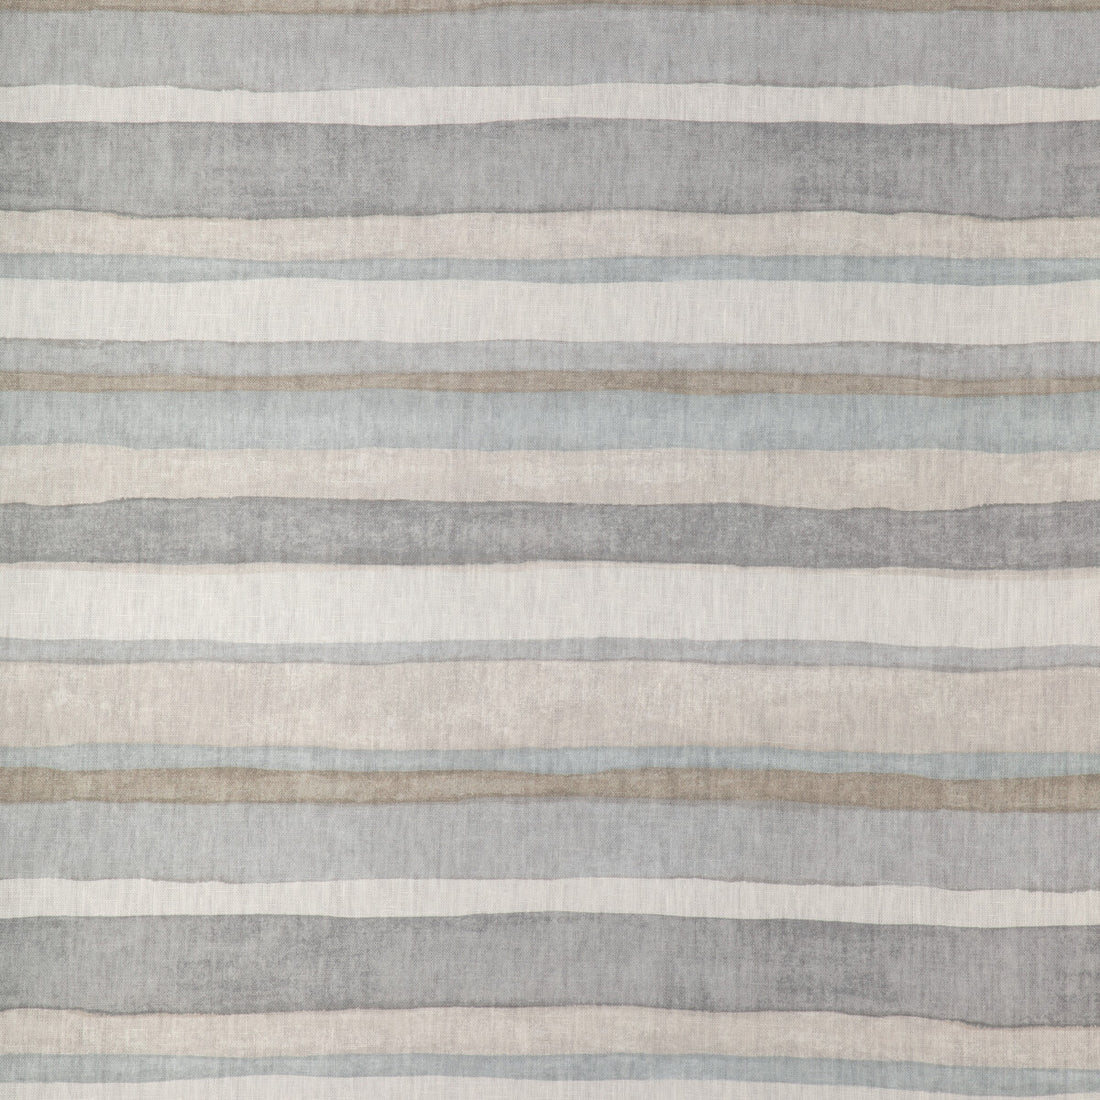 Malabo fabric in pewter color - pattern MALABO.11.0 - by Kravet Basics in the Mid-Century Modern collection